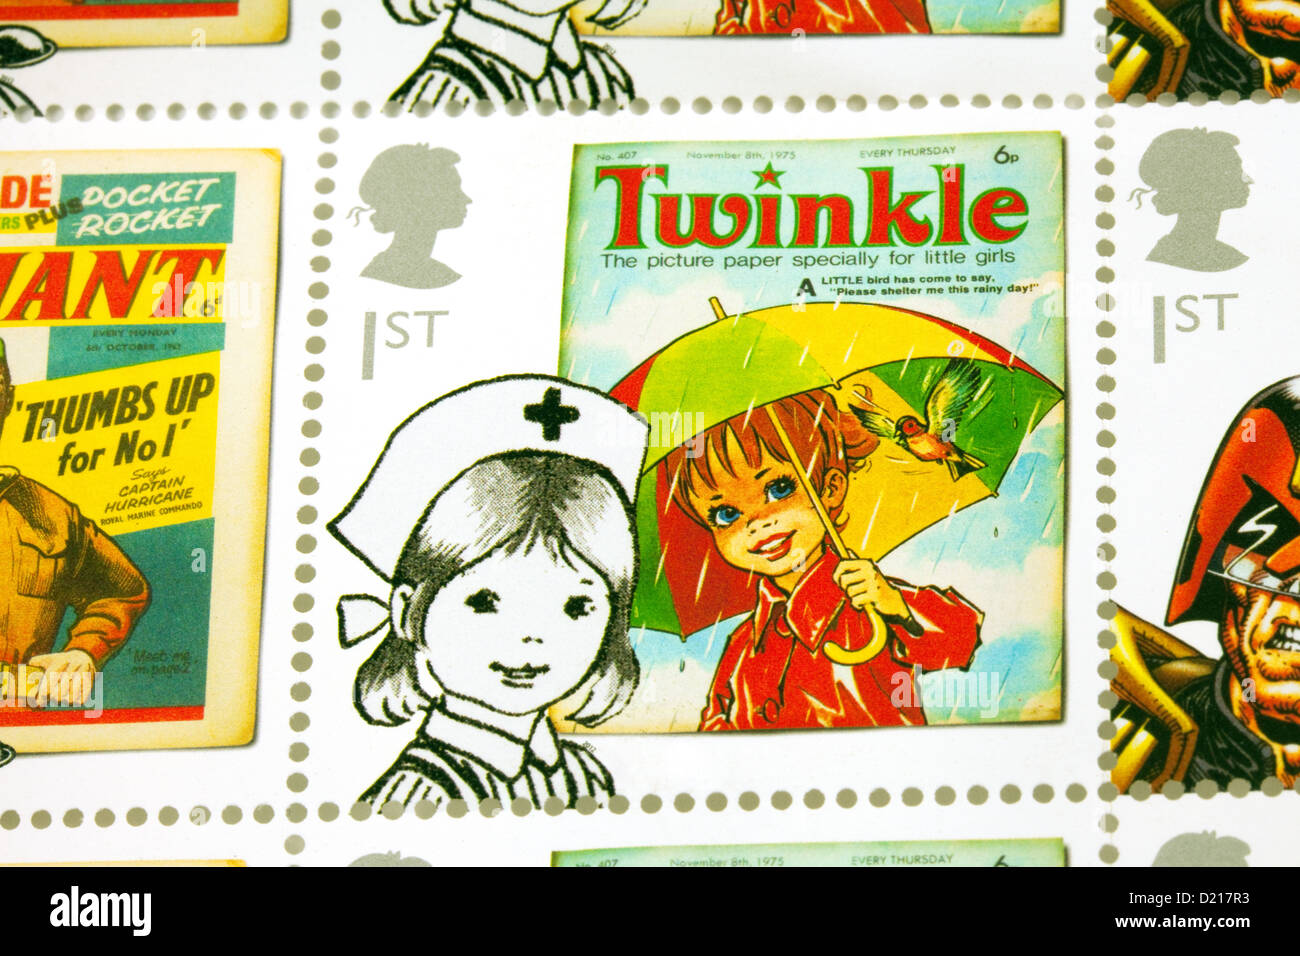 British royal mail commemorative postage stamp showing the old english comic 'Twinkle', UK Stock Photo